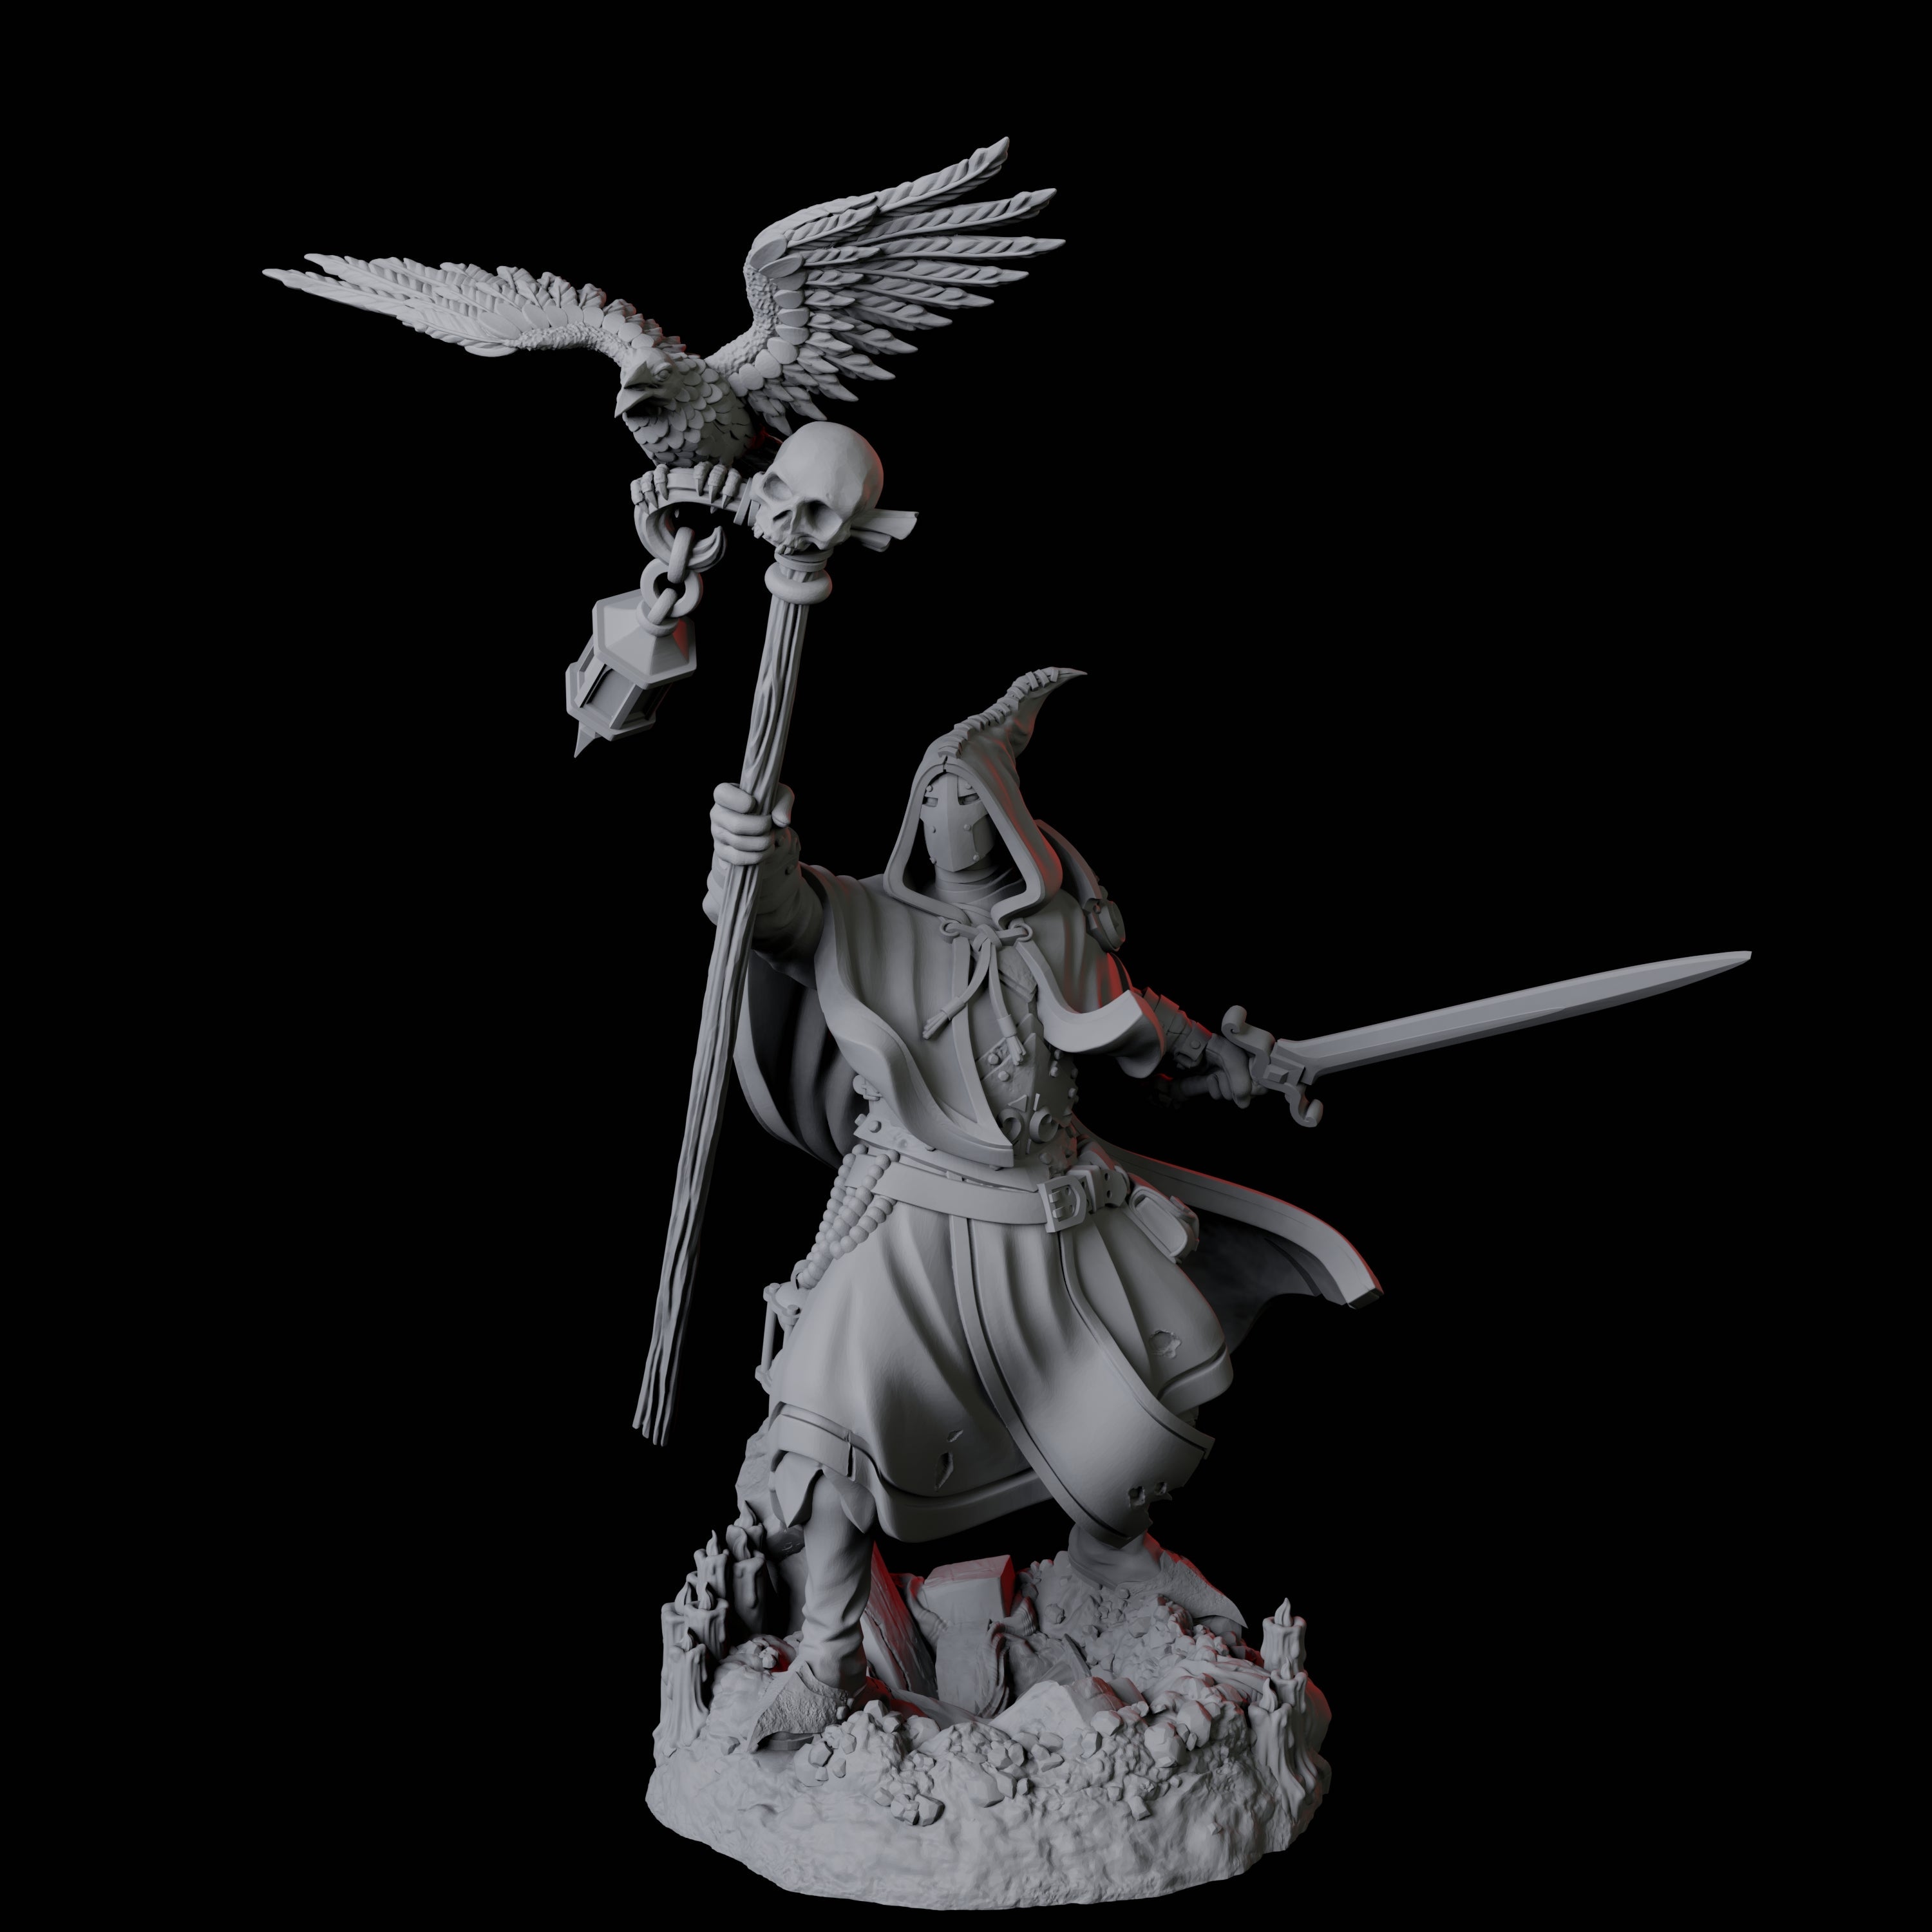 Creepy Gravedigger C Miniature for Dungeons and Dragons, Pathfinder or other TTRPGs